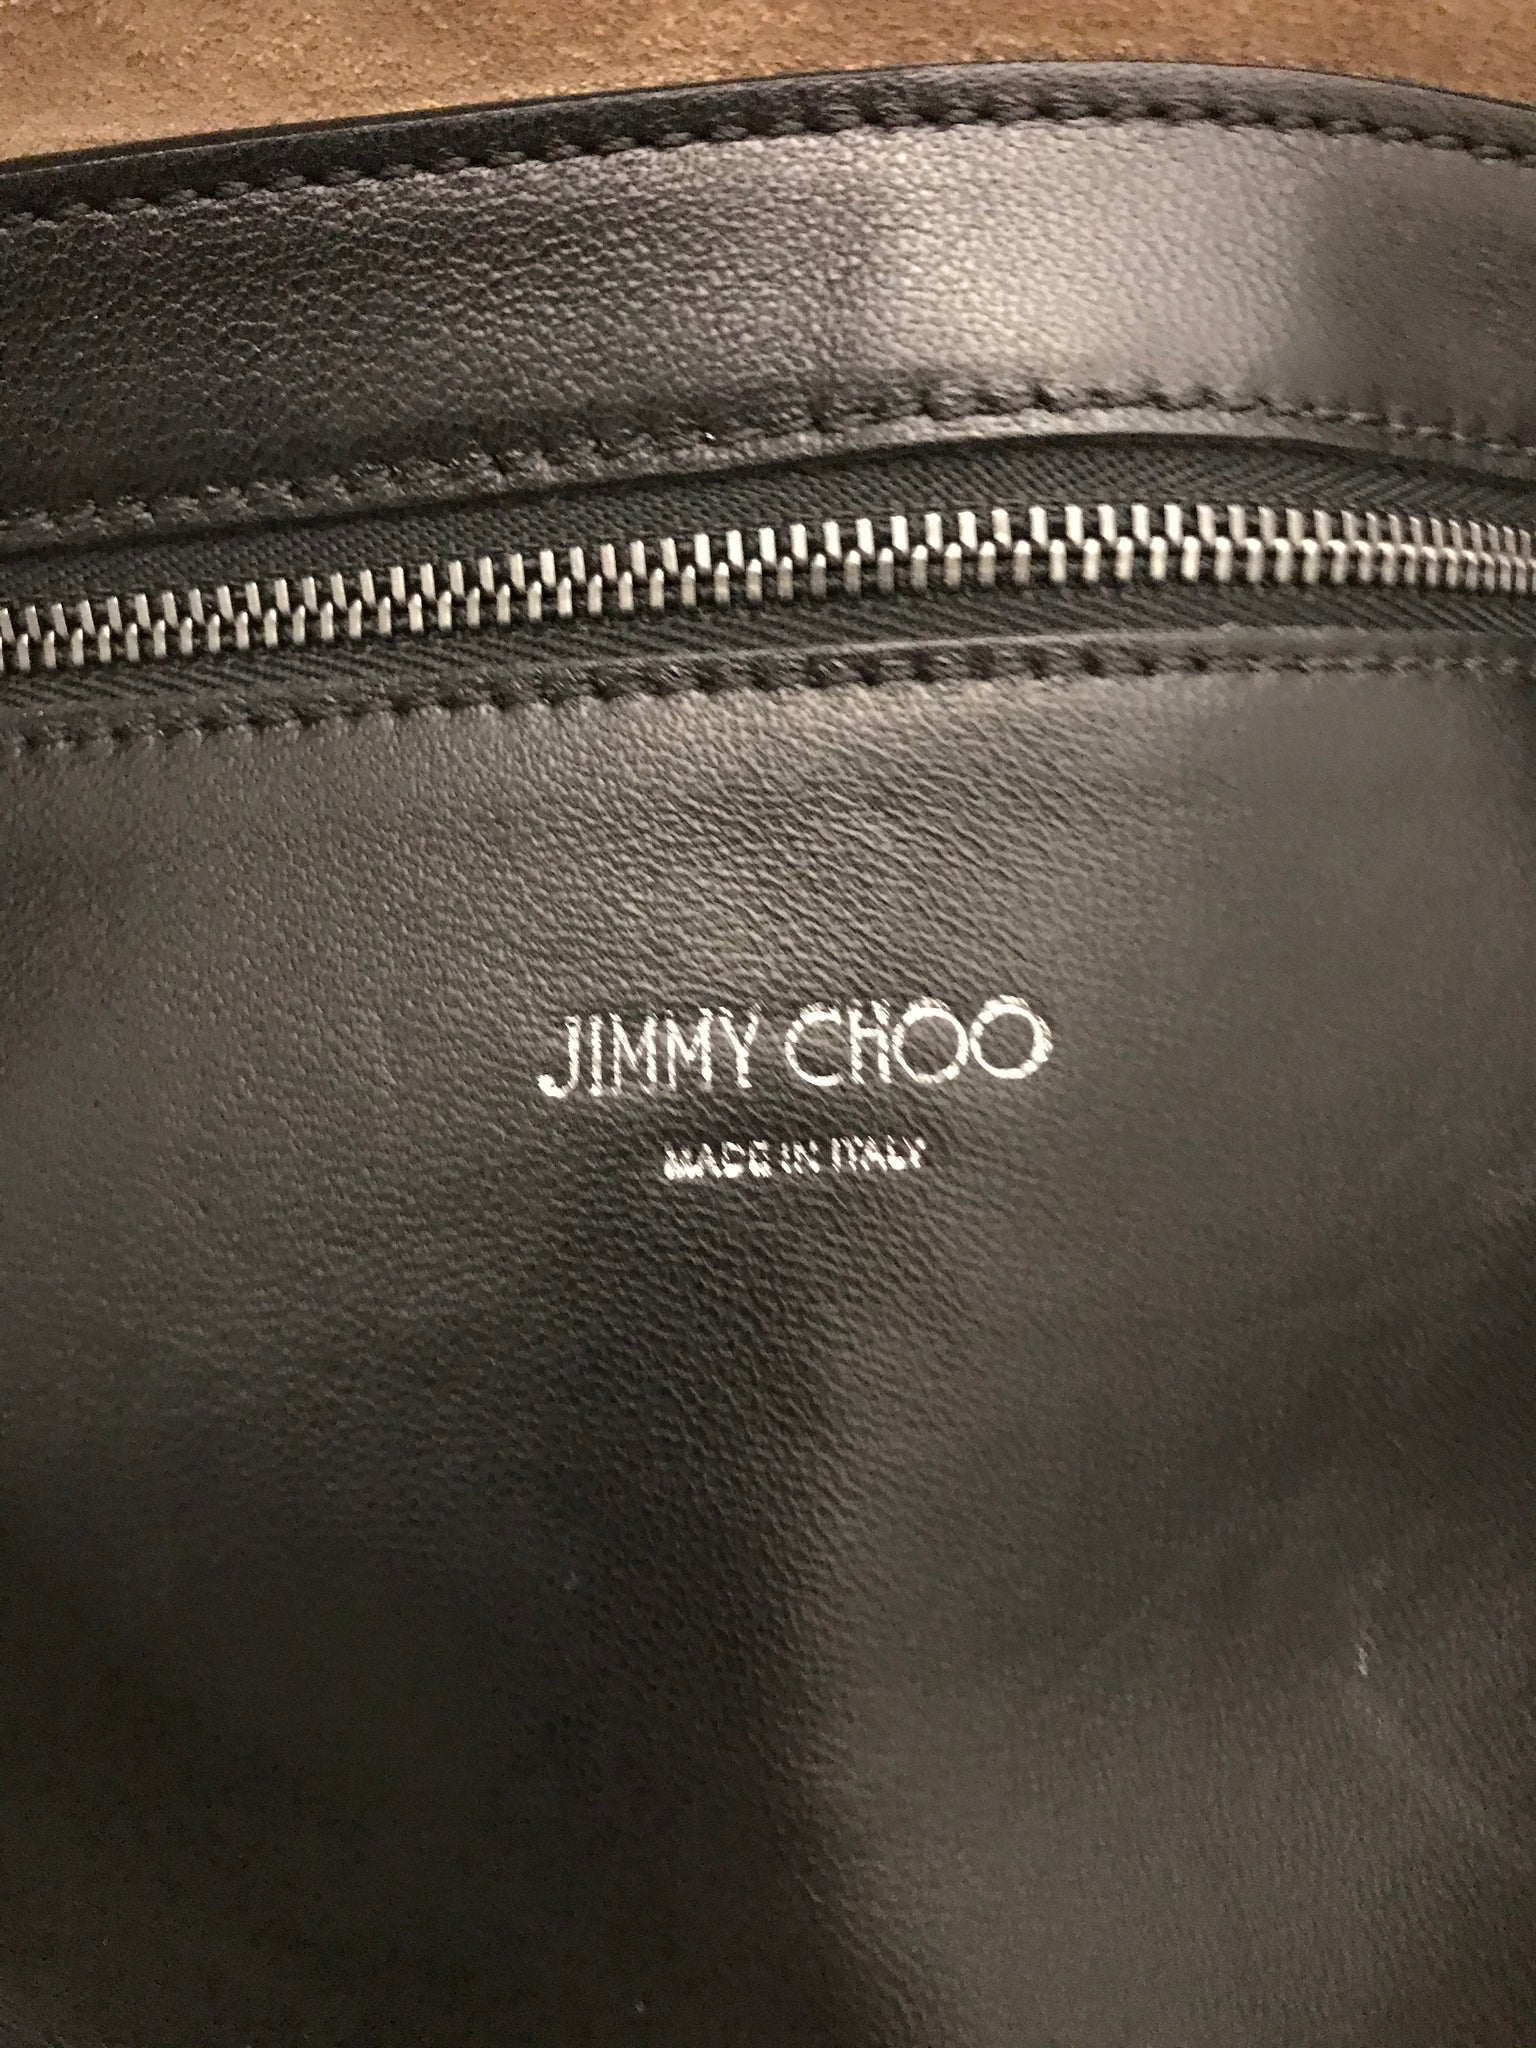 Isabella's Wardrobe Jimmy Choo Studded East West Tote.